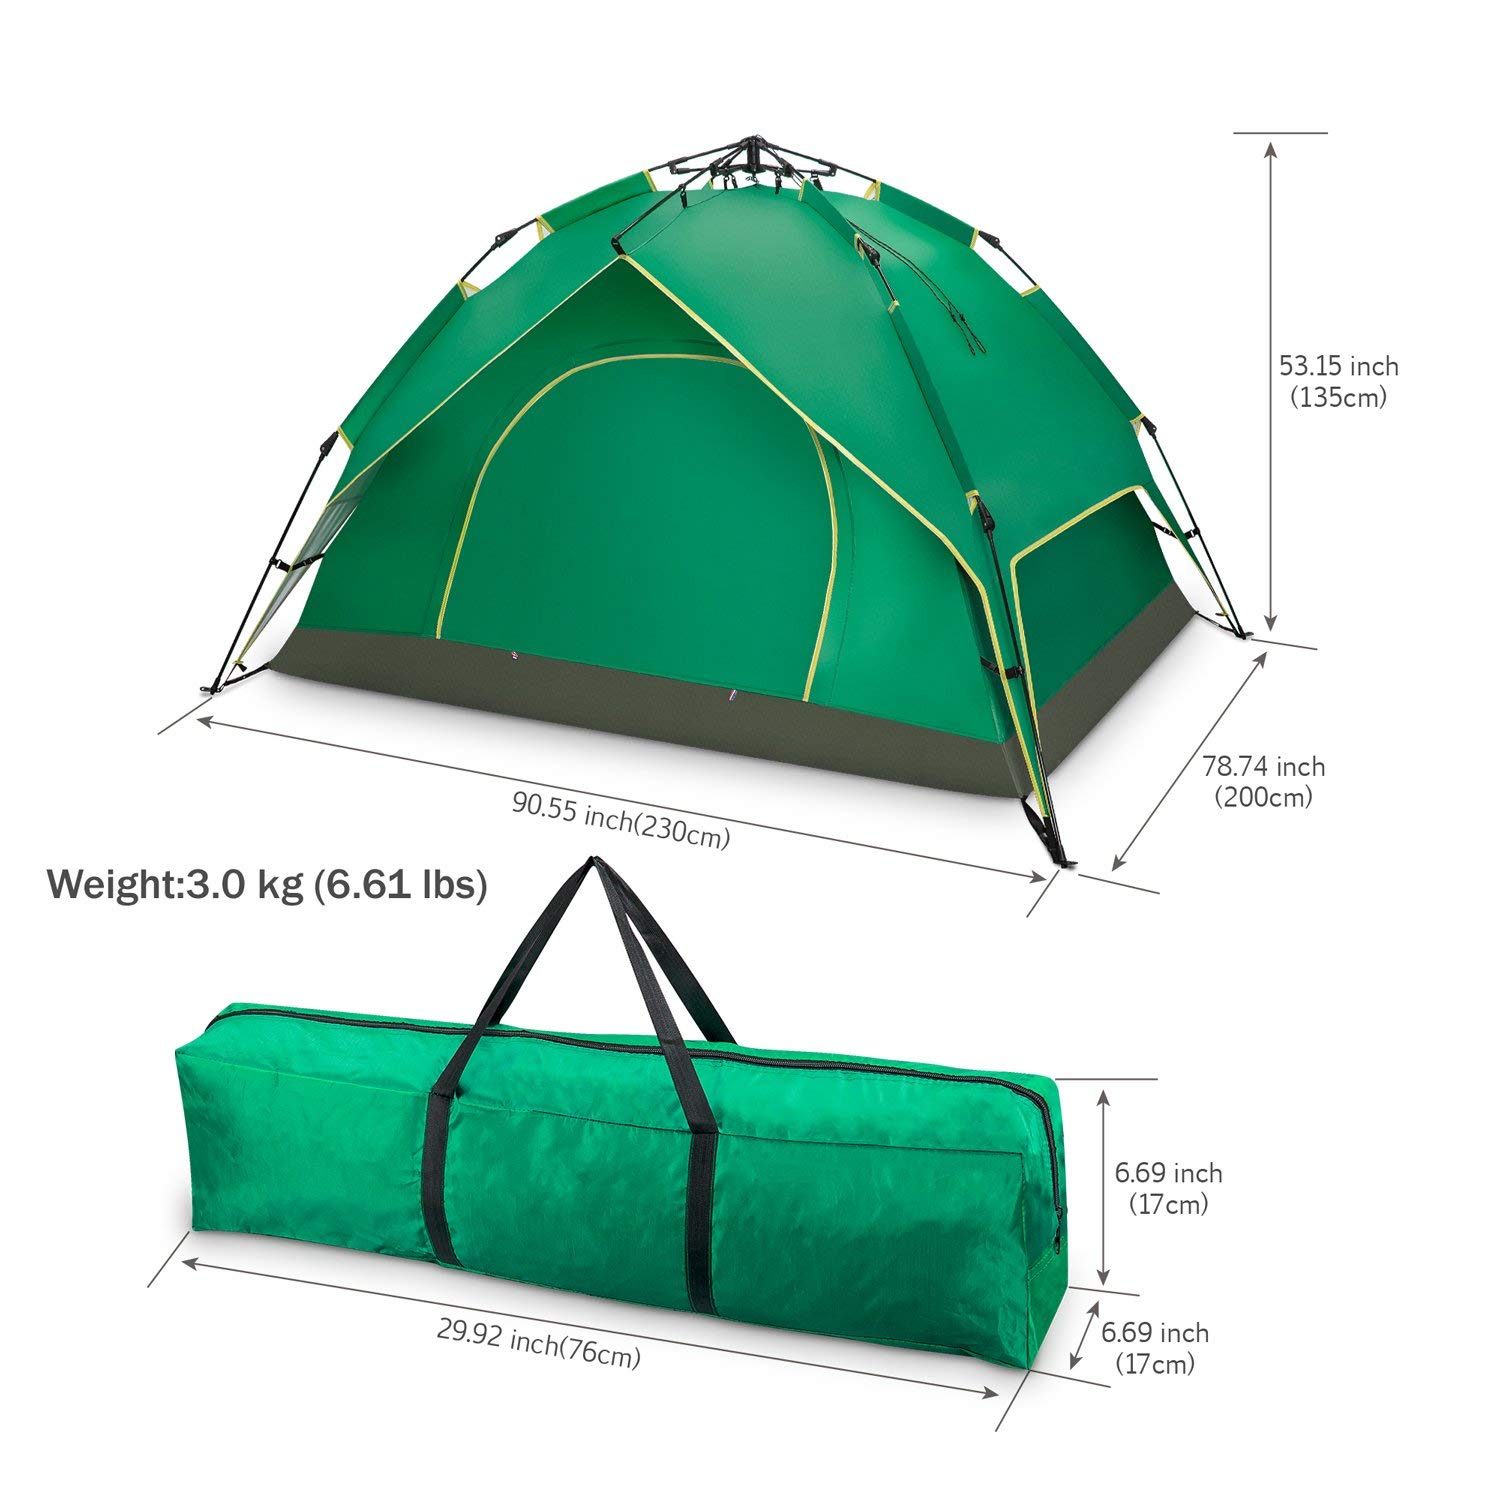 AIOIAI Camping Tent, 3-4 Person Instant Pop Up Double-Uses Family Camping Tent, Waterproof Double Layer Backpacking Tent for Outdoor Camping, 4 Season Backpacking Tent 